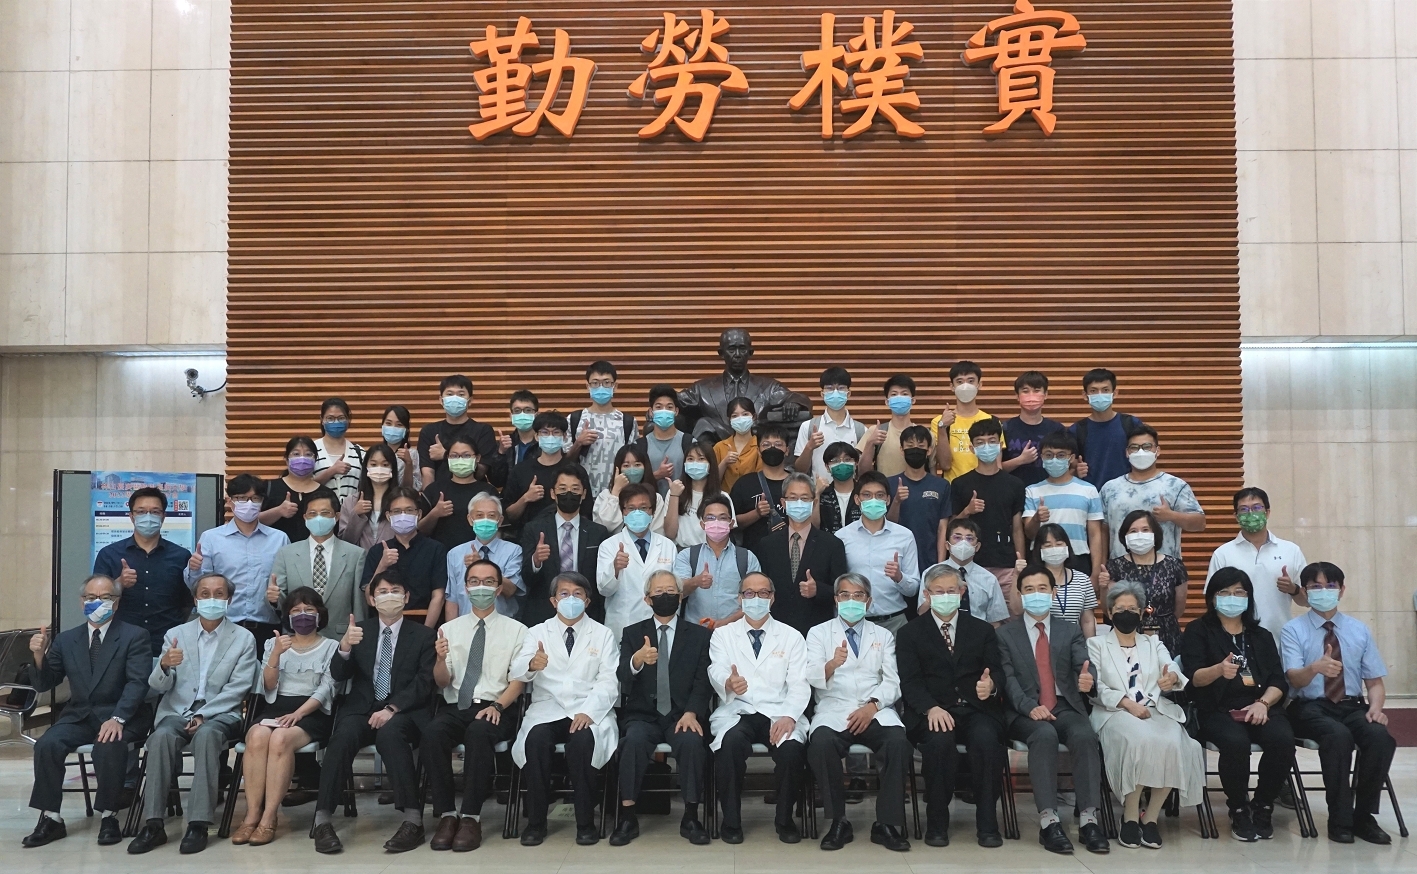 A group photo was taken in the hall of the Medical Science Building of the Chang Gung Memorial Hospital Linkou Branch.